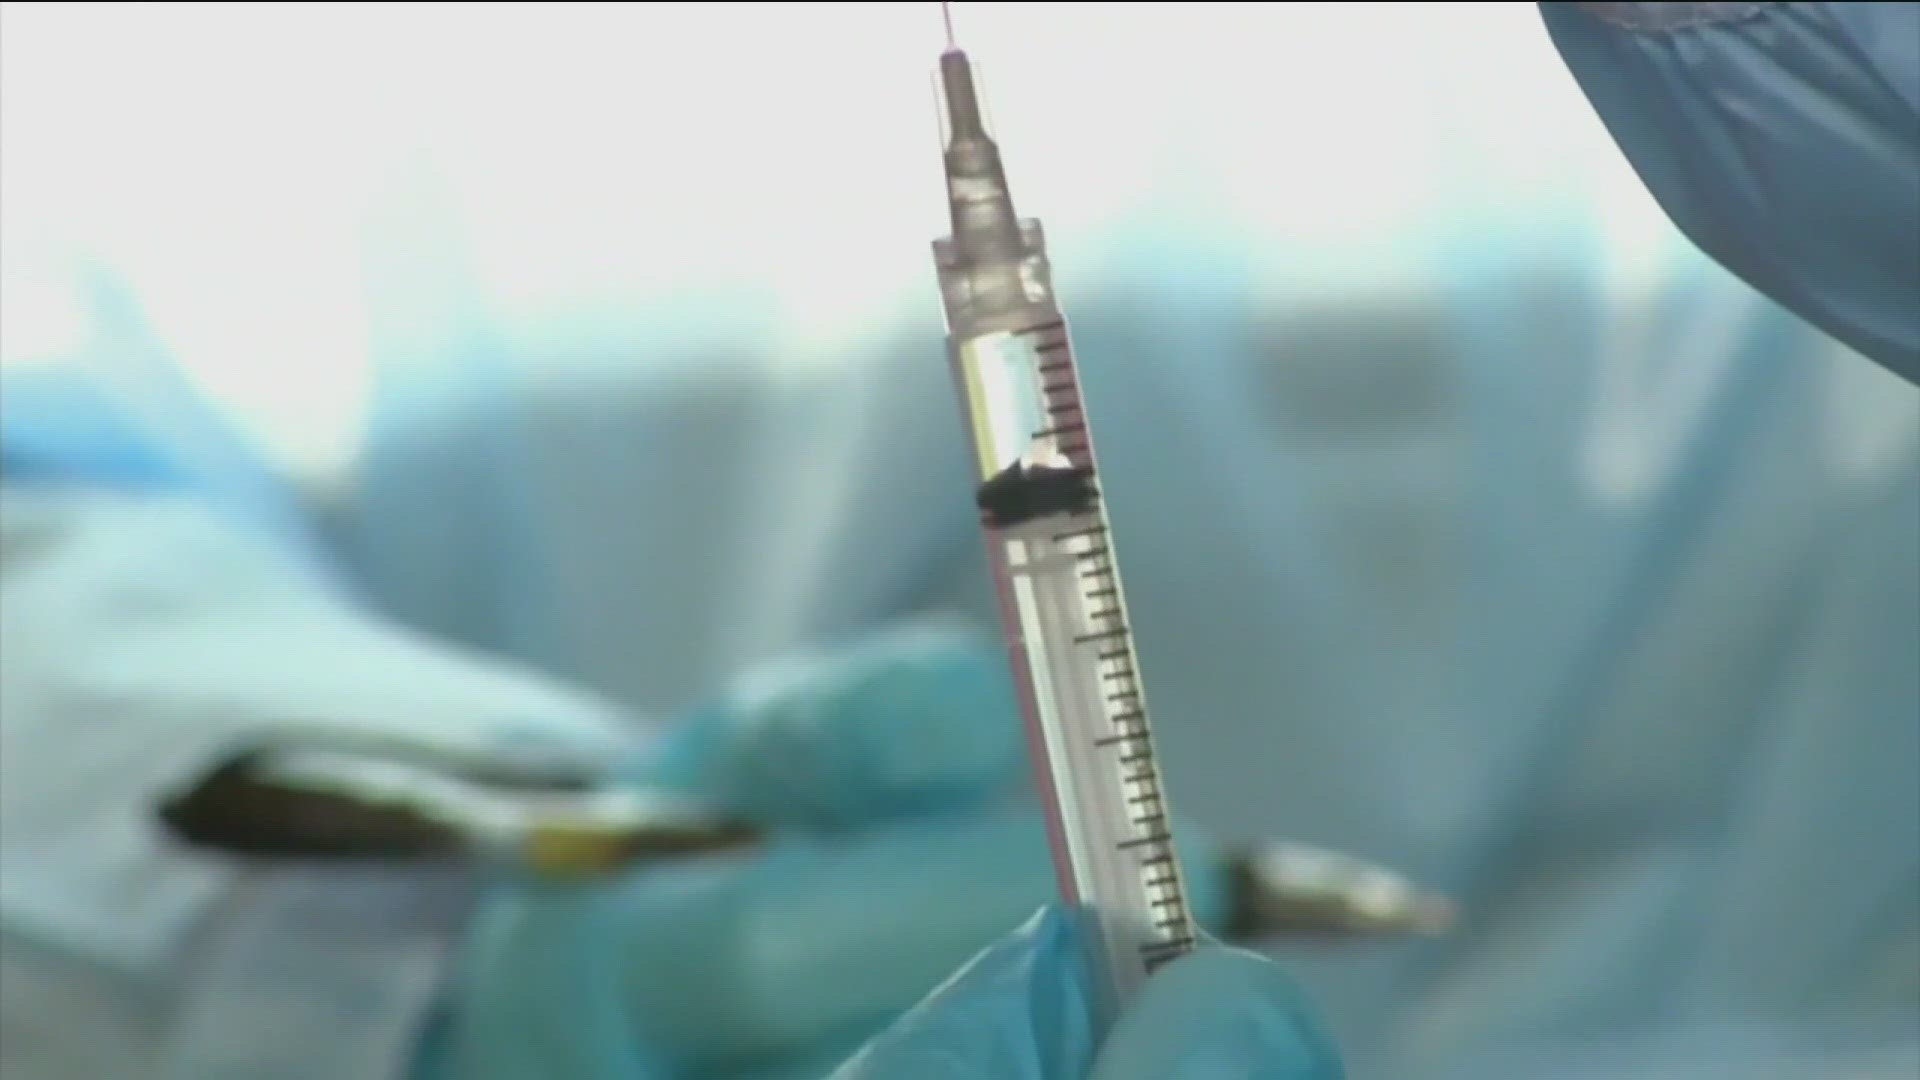 As San Diego cases rise, doctors say now's the time to get your shot to protect yourself from the virus.